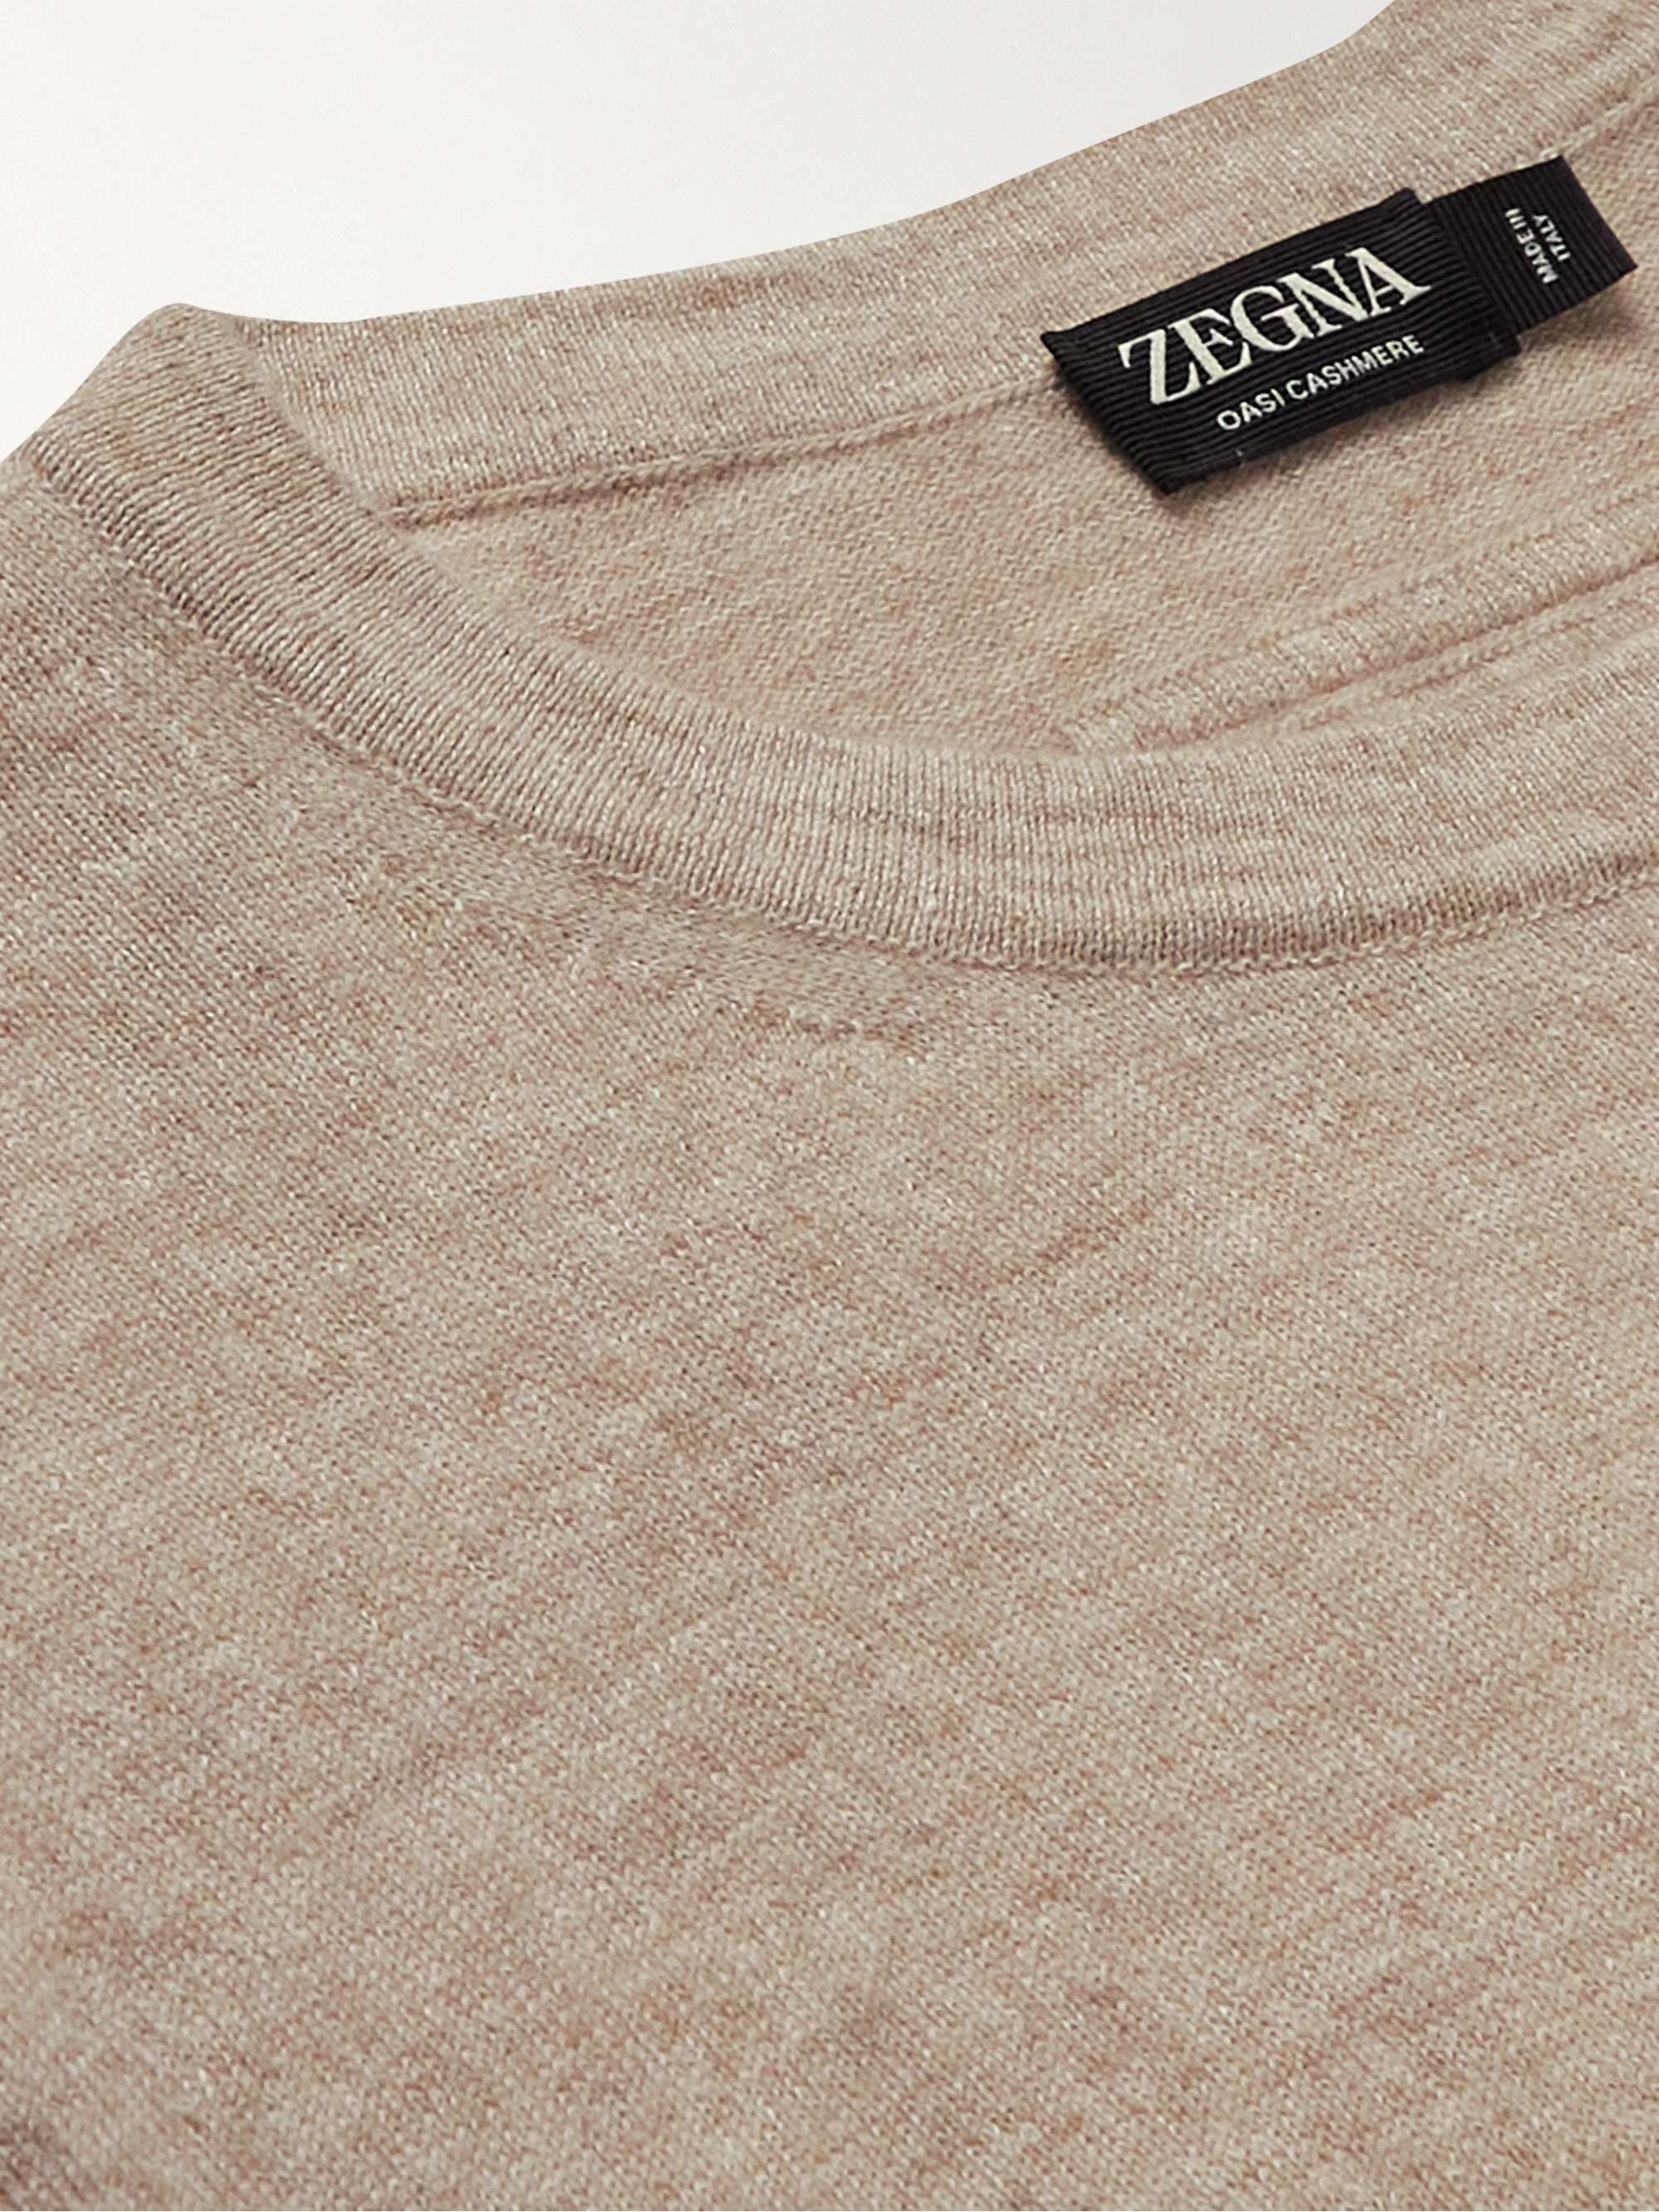 ZEGNA Oasi Cashmere and Linen-Blend Sweater